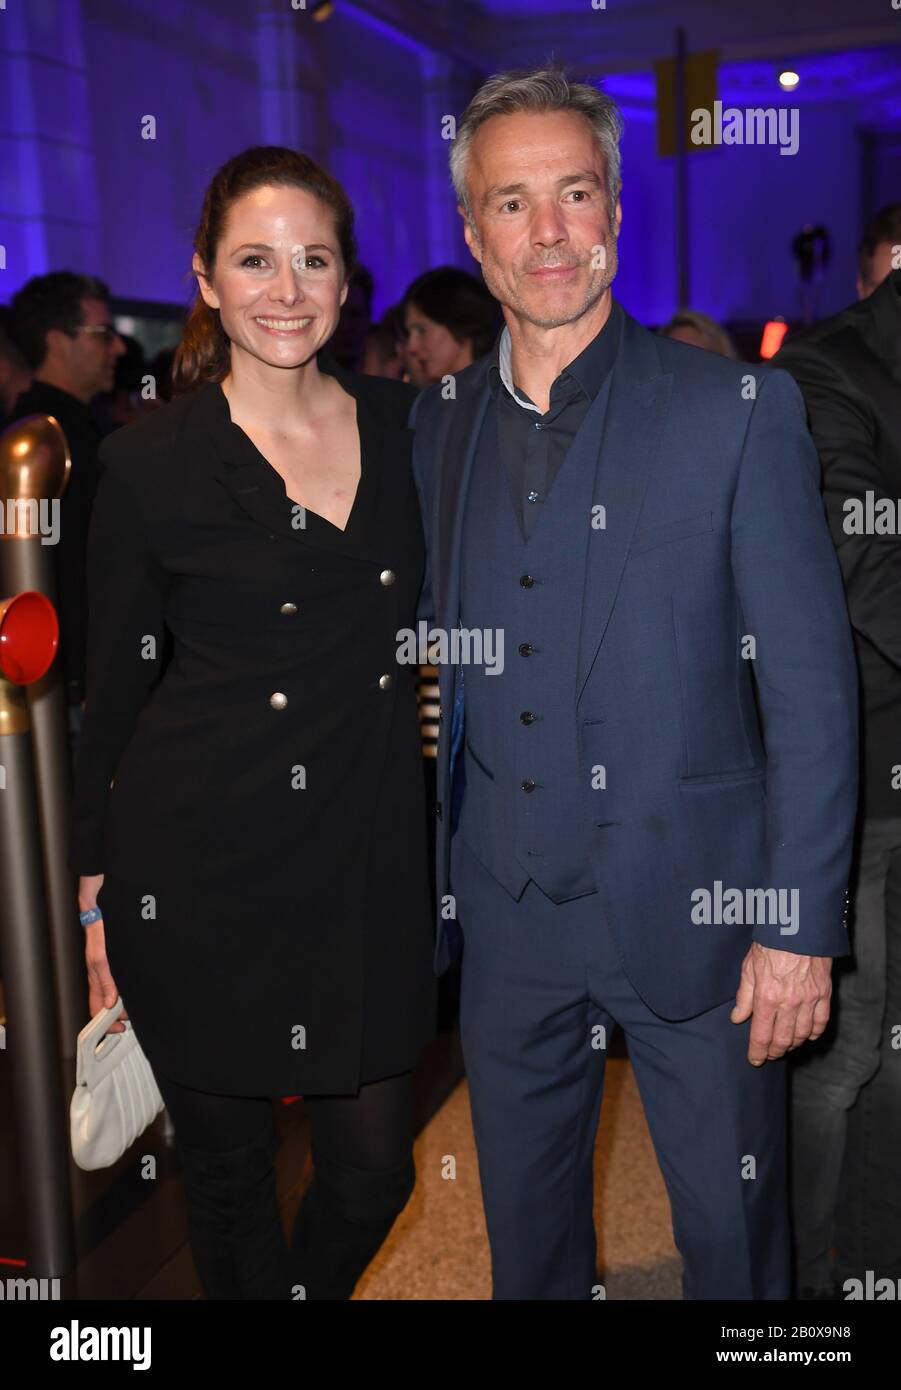 Berlin, Germany. 21st Feb, 2020. 70th Berlinale, Party Blue Hour: Actor Hannes Jaenicke and actress Ellenie Salvo Gonzalez. The International Film Festival takes place from 20.02. to 01.03.2020. Credit: Britta Pedersen/dpa-zentralbild/dpa/Alamy Live News Stock Photo